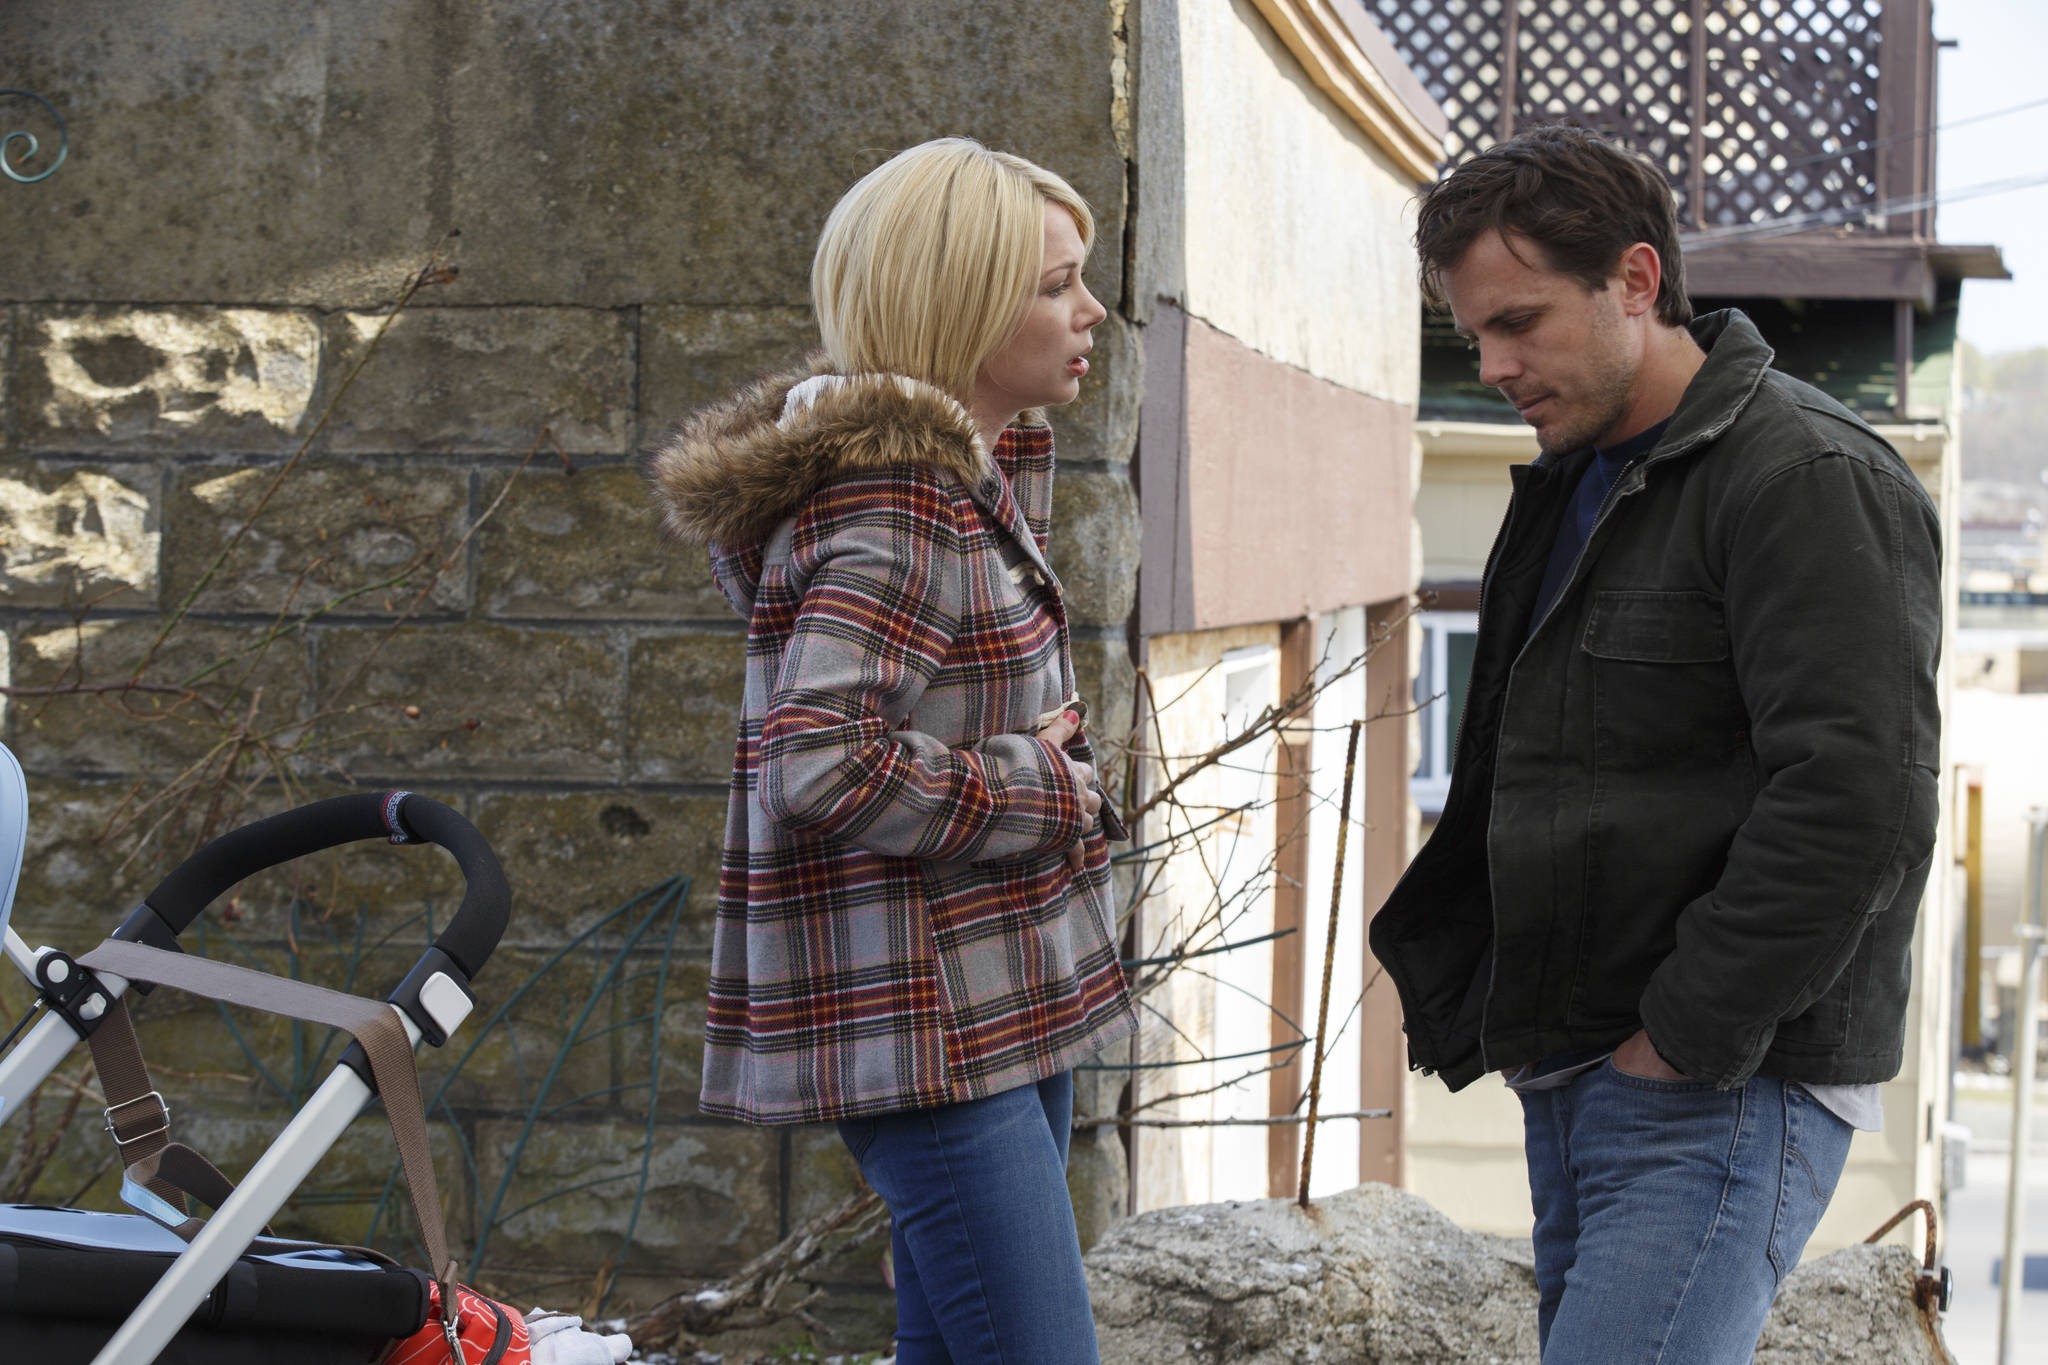 FILE - This image released by Roadside Attractions and Amazon Studios shows Michelle Williams, left, and Casey Affleck in a scene from “Manchester By The Sea.” (Claire Folger/Roadside Attractions and Amazon Studios via AP, File)